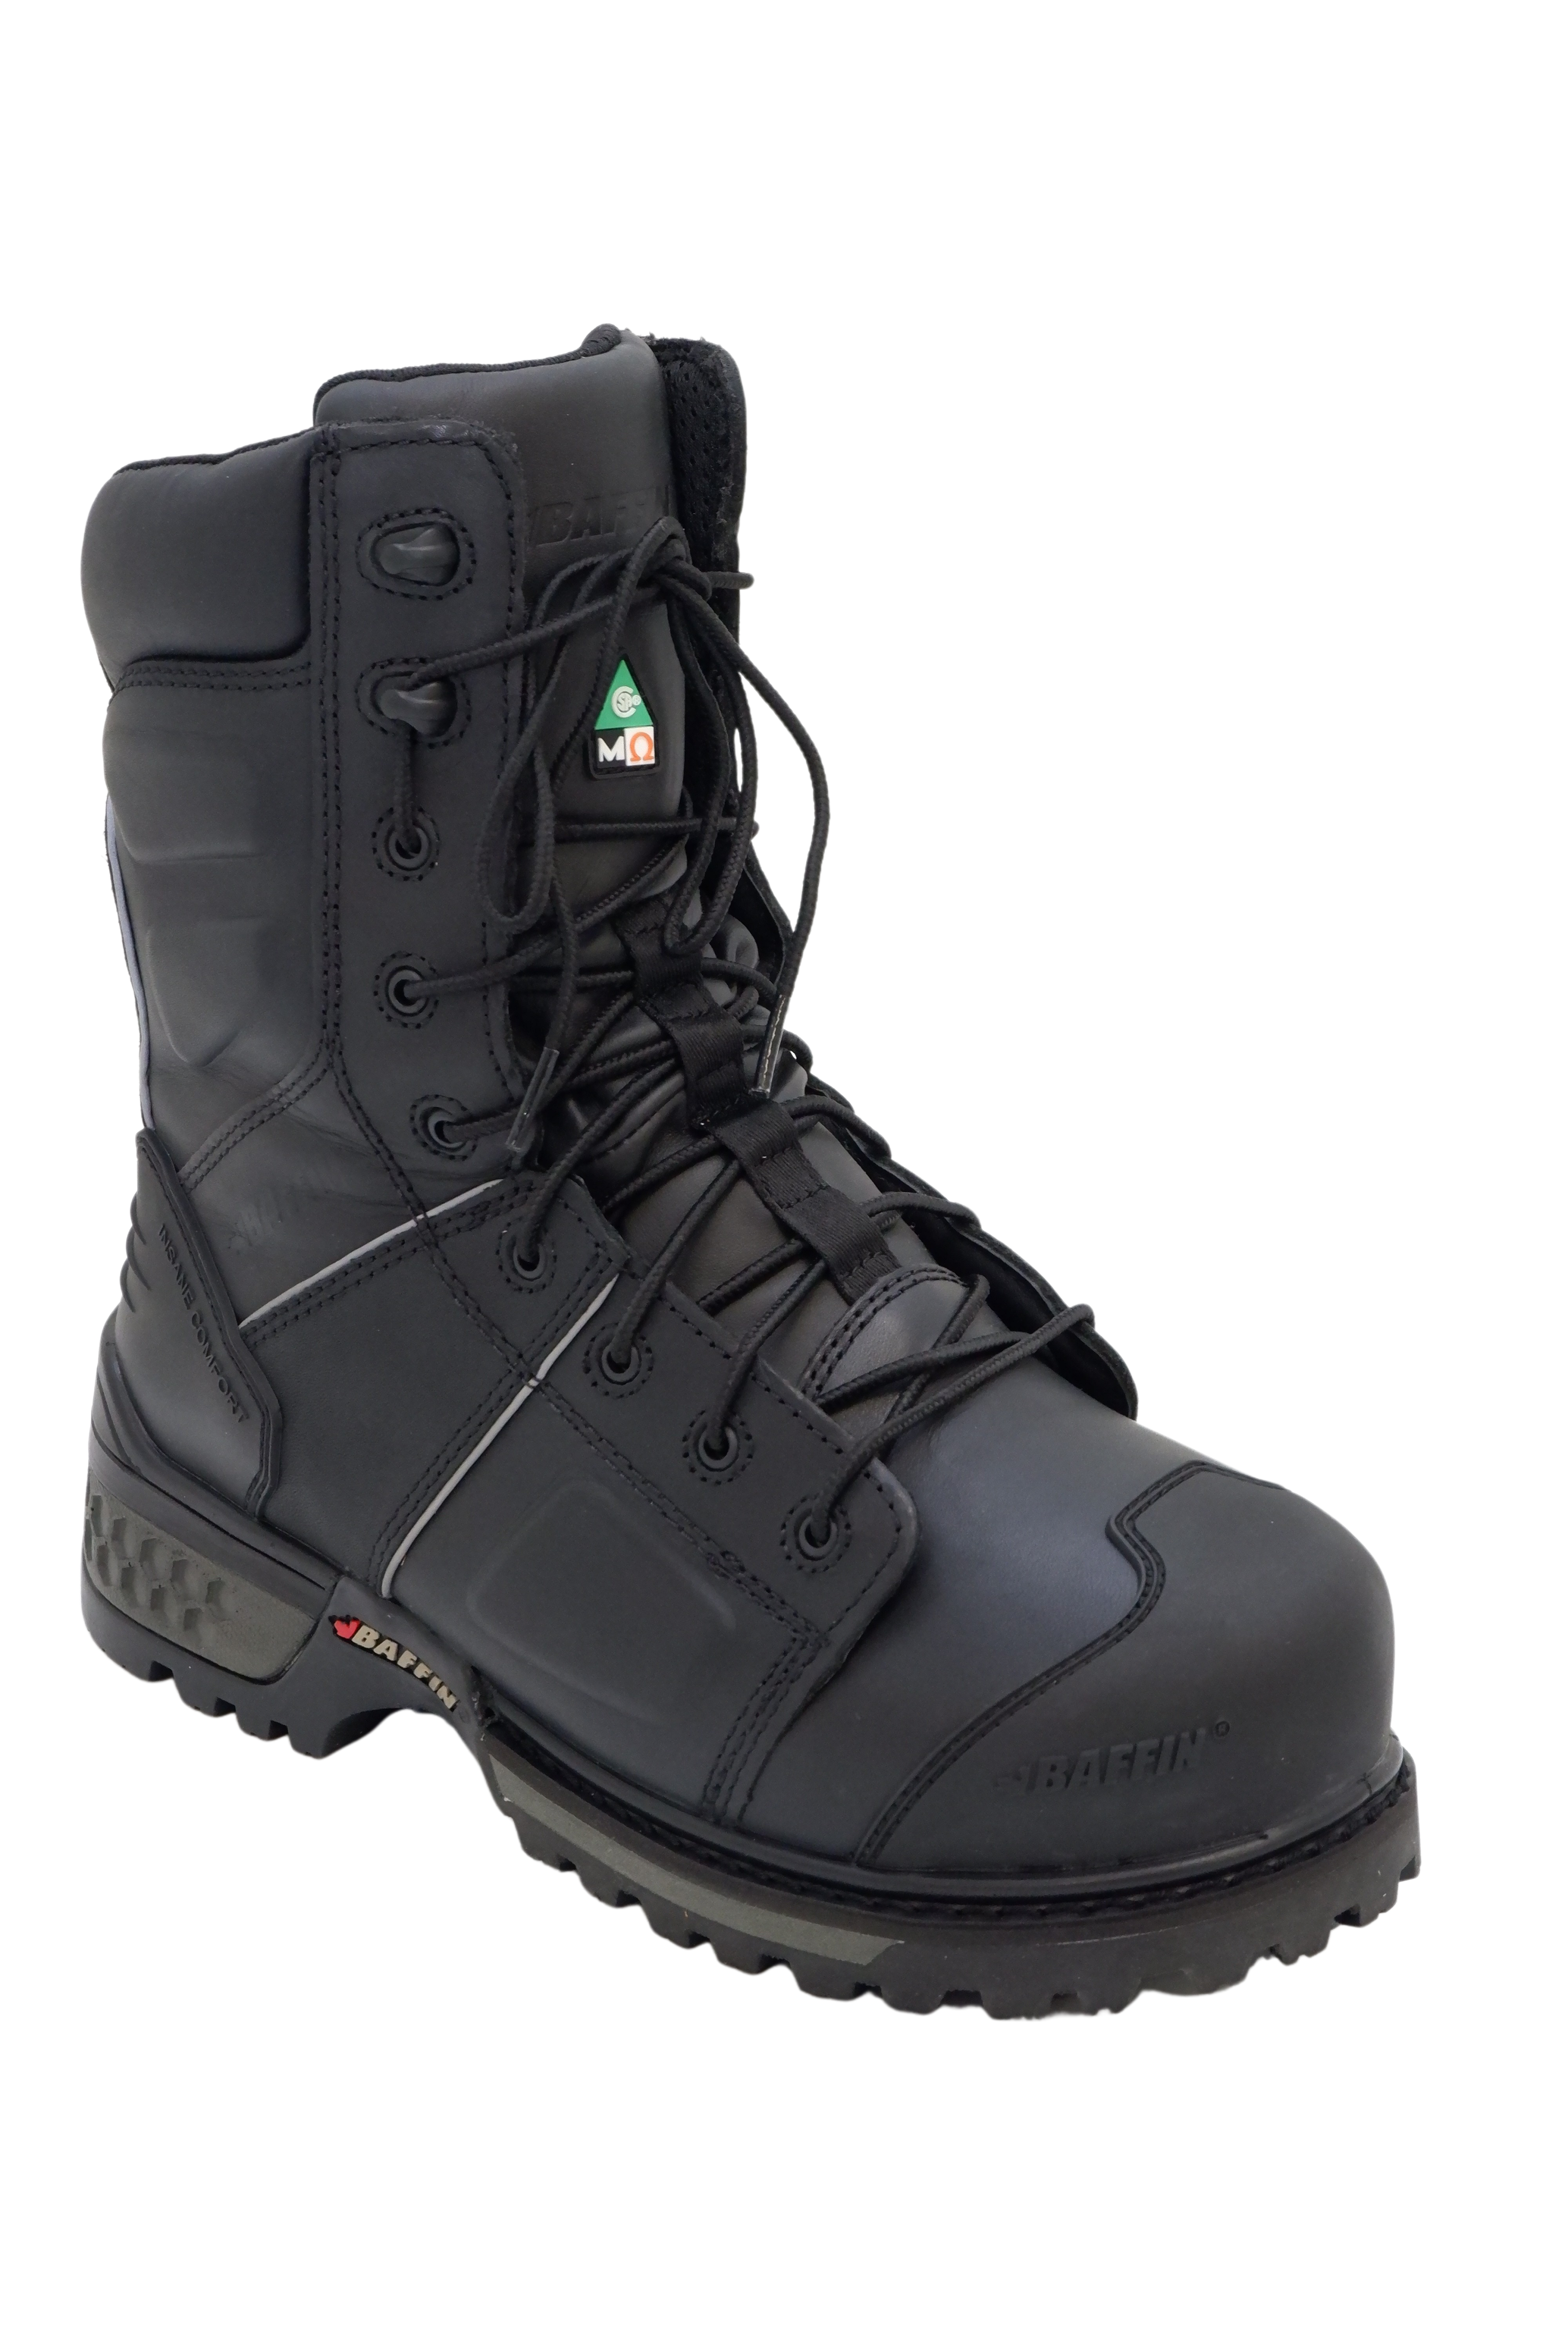 Baffin Men's Safety Work Boots Monster Internal Metguard 8” All Season Leather Waterproof Extreme Comfort with Composite Toe  | Black | Sizes 7 - 14